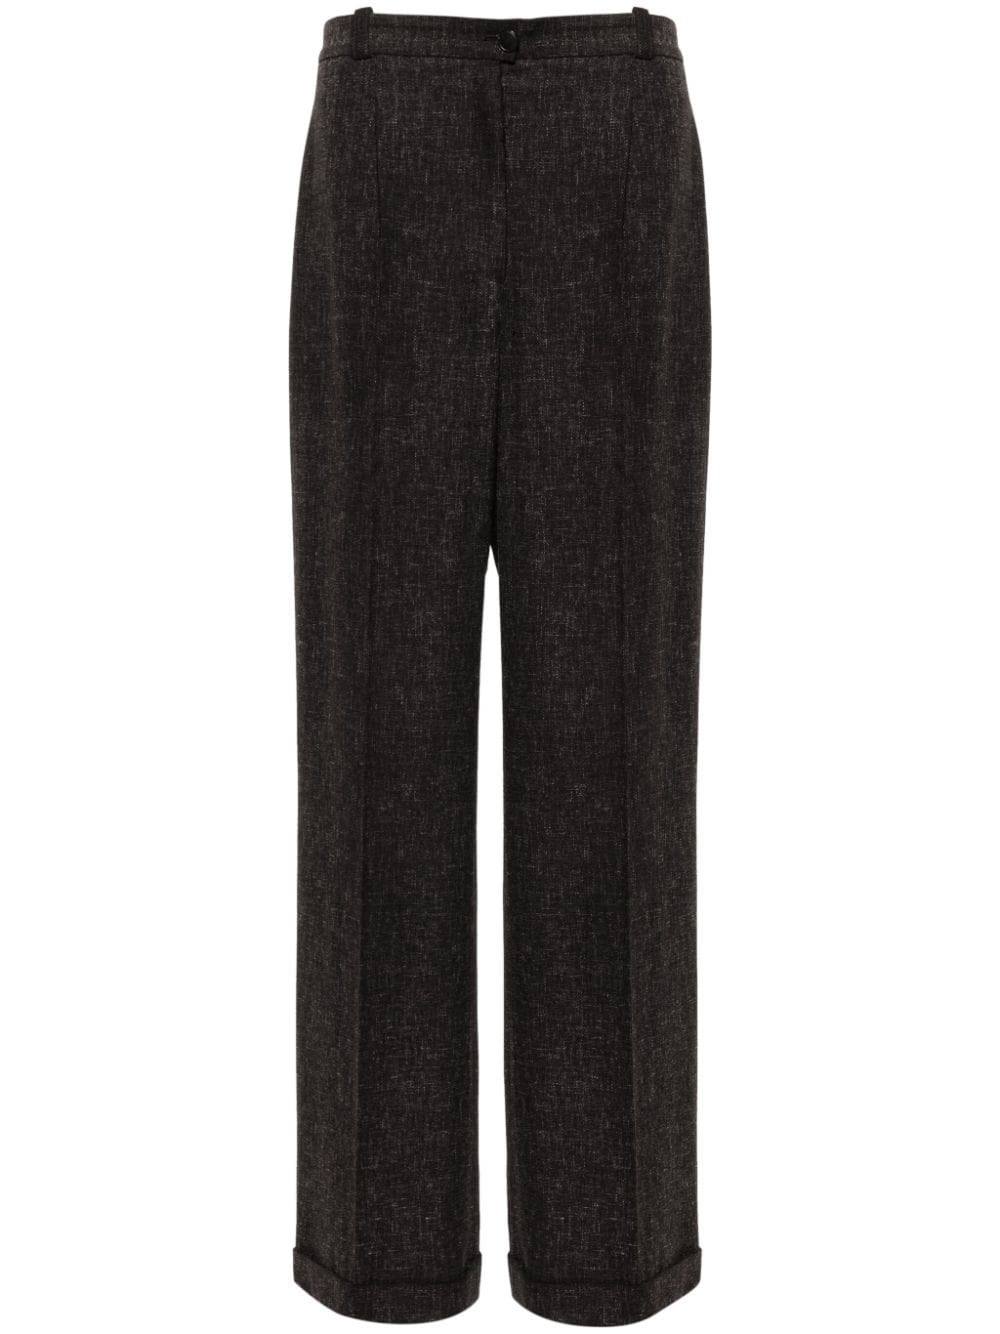 CHANEL Pre-Owned 2002 wool-blend wide-leg trousers - Brown